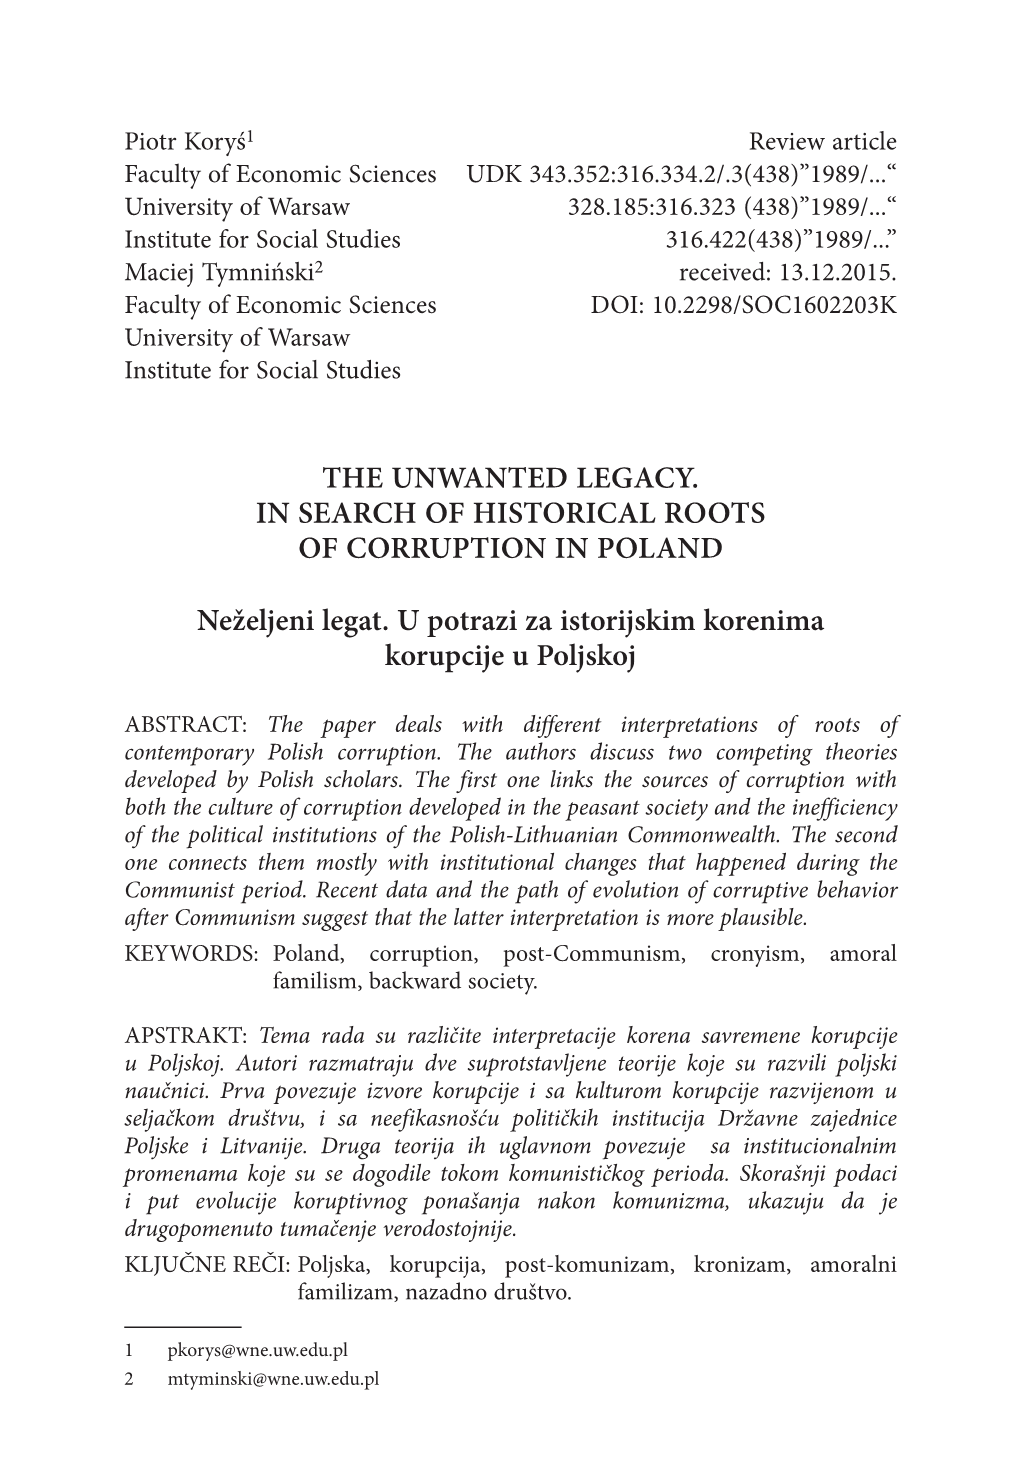 The Unwanted Legacy. in Search of Historical Roots of Corruption in Poland